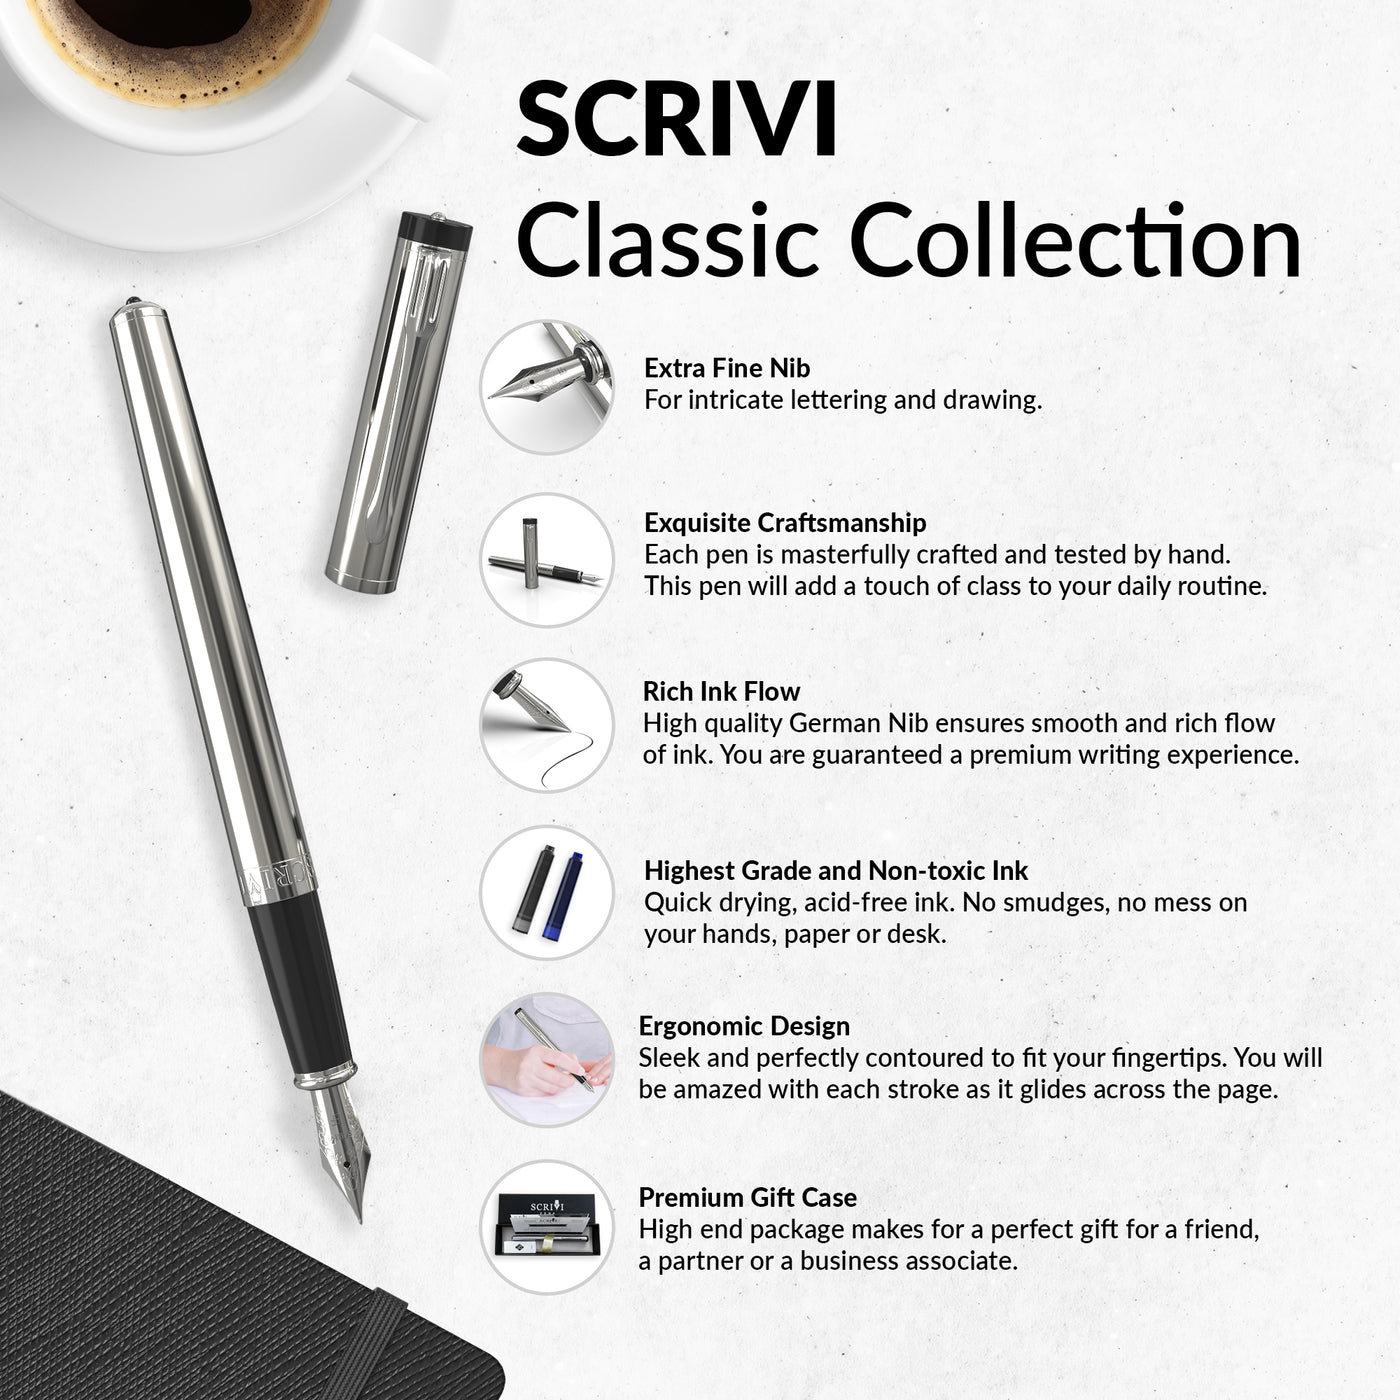 SCRIVI PENS Fountain Pen Set [Extra Fine Nib], Classic Collection, Gift Case; 2 Ink Cartridges, Ink Refill Converter, Calligraphy, Smooth Writing Pens [Black Chrome Trim], Perfect for Men and Women